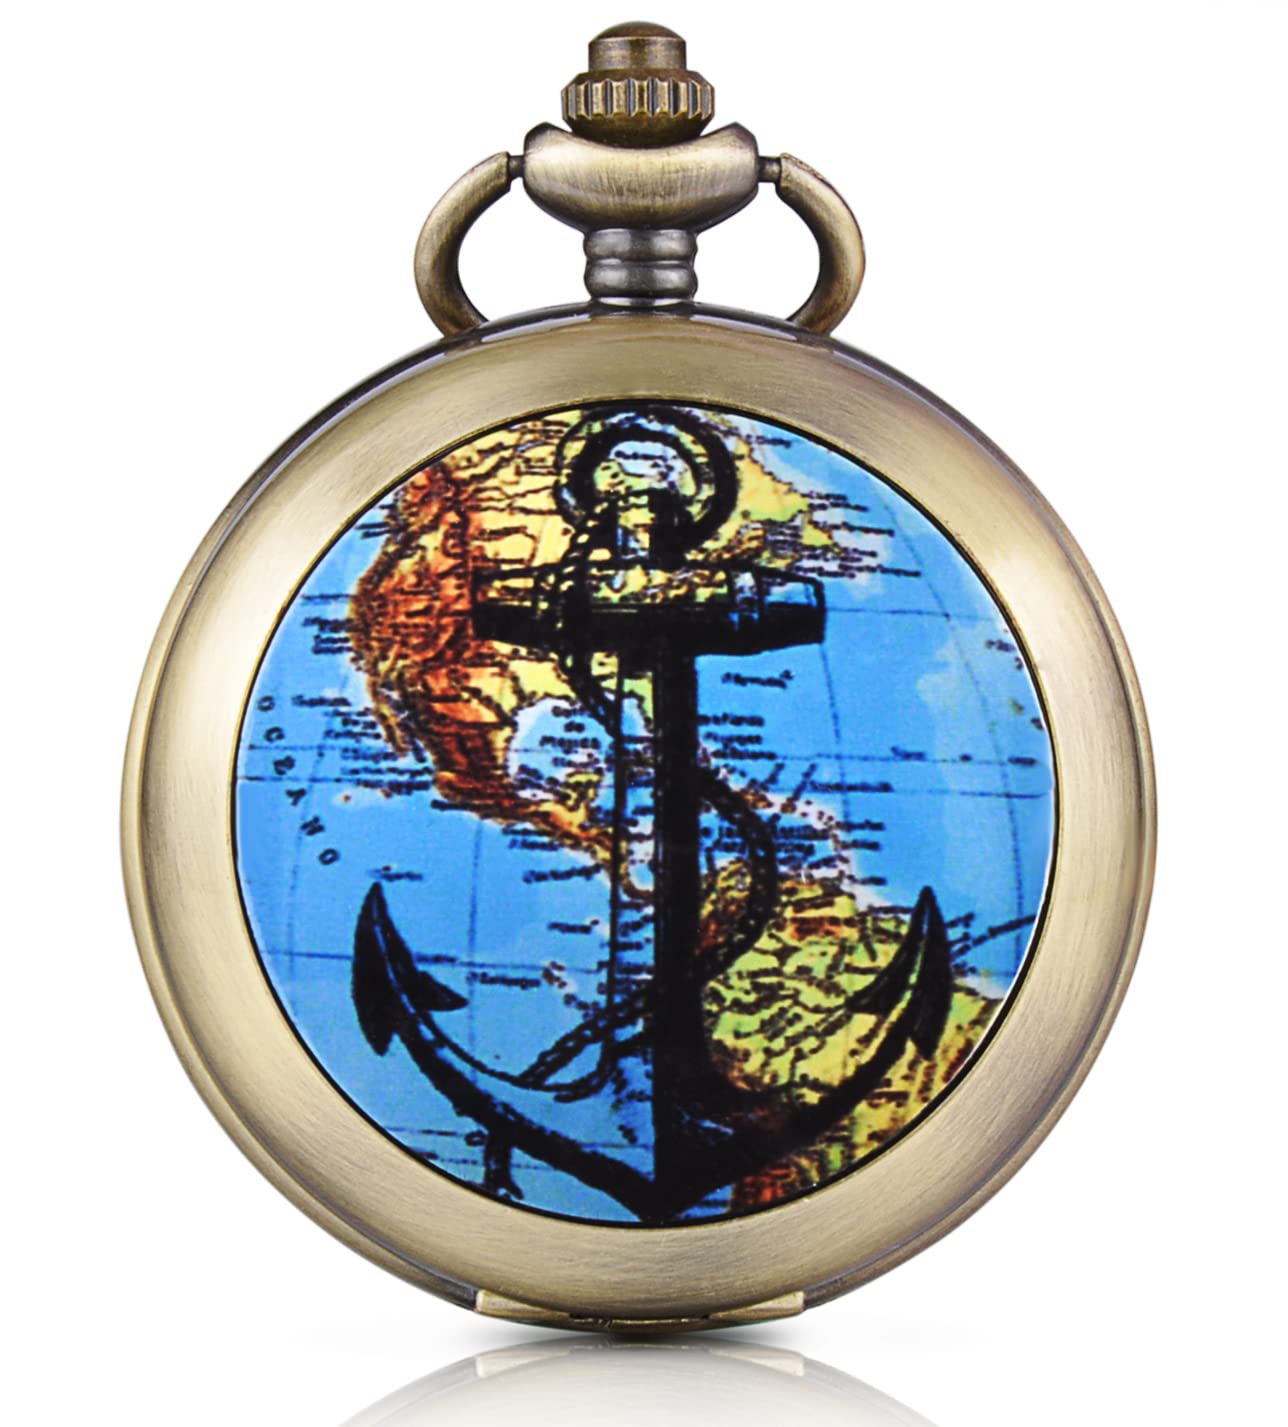 Infinite U World Map Anchor Skeleton Mechanical Pocket Watch Photo Locket Pendant Hand Wind Roman Numerals Black Dial Fob/Long Chain Sweater Necklace